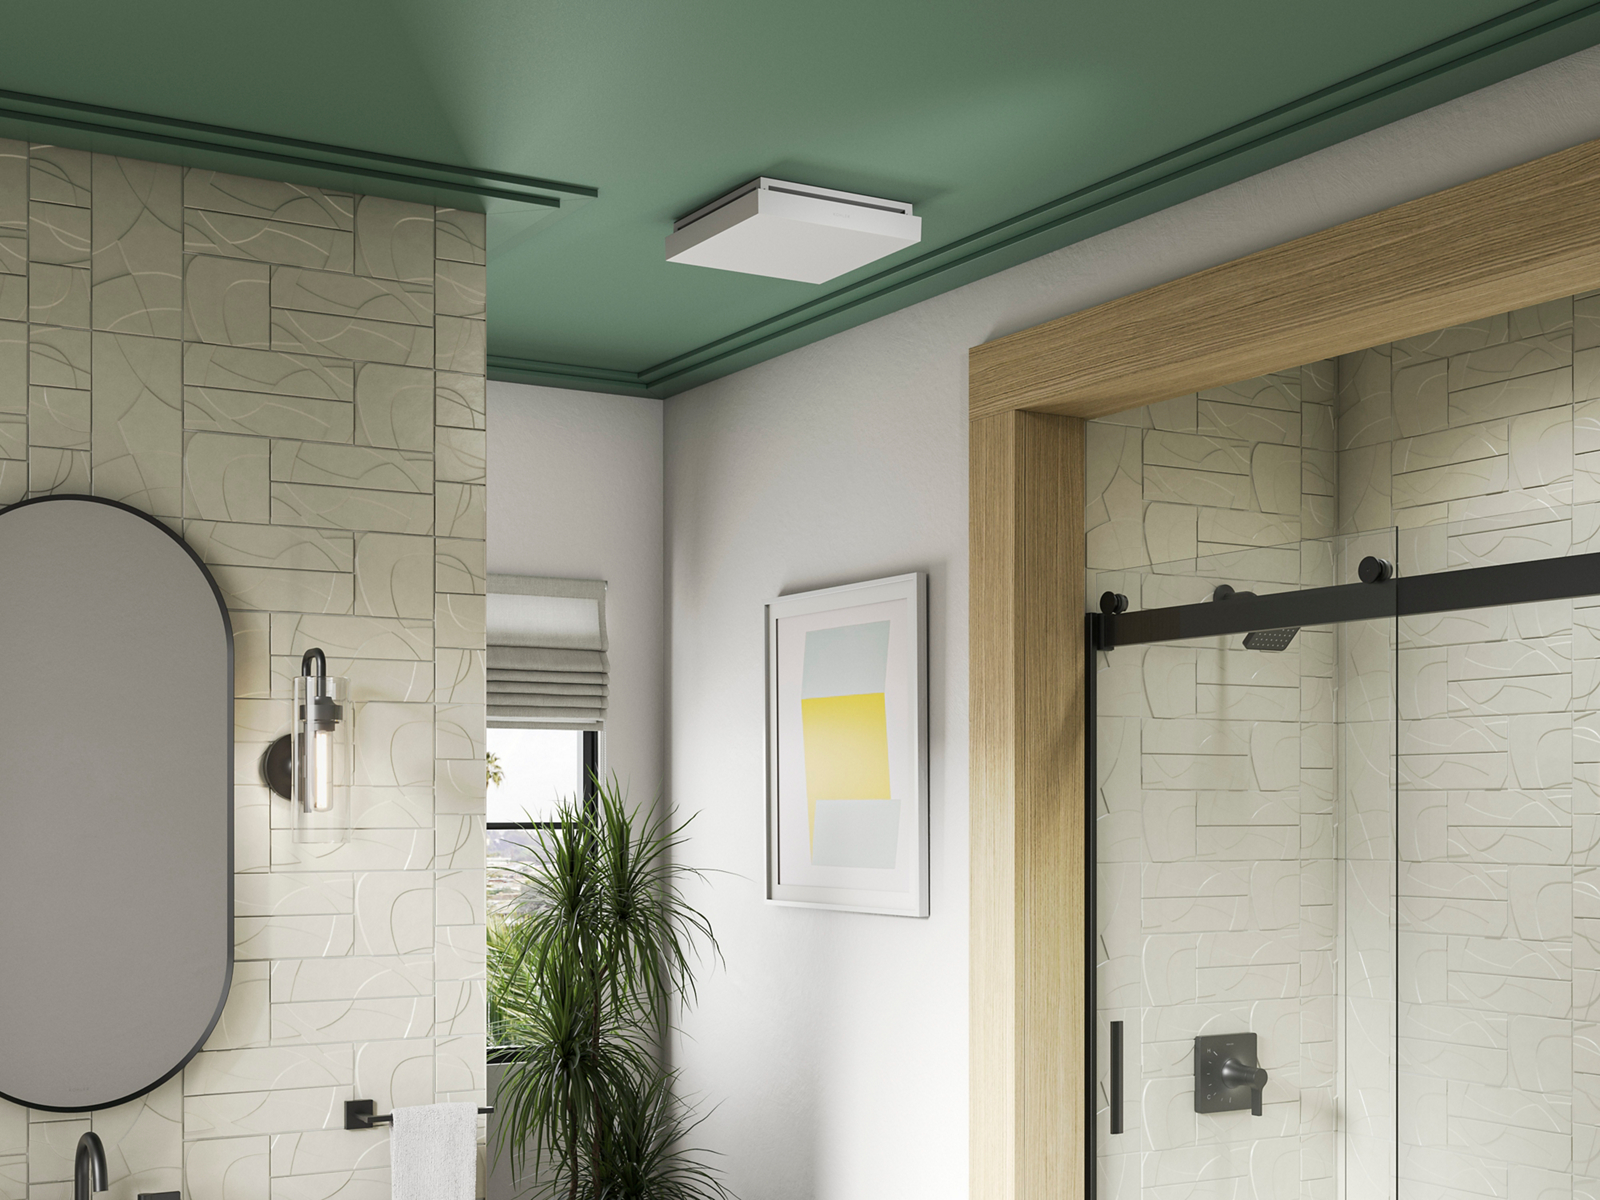 A white Atmo bathroom exhaust fan mounted on a green ceiling.